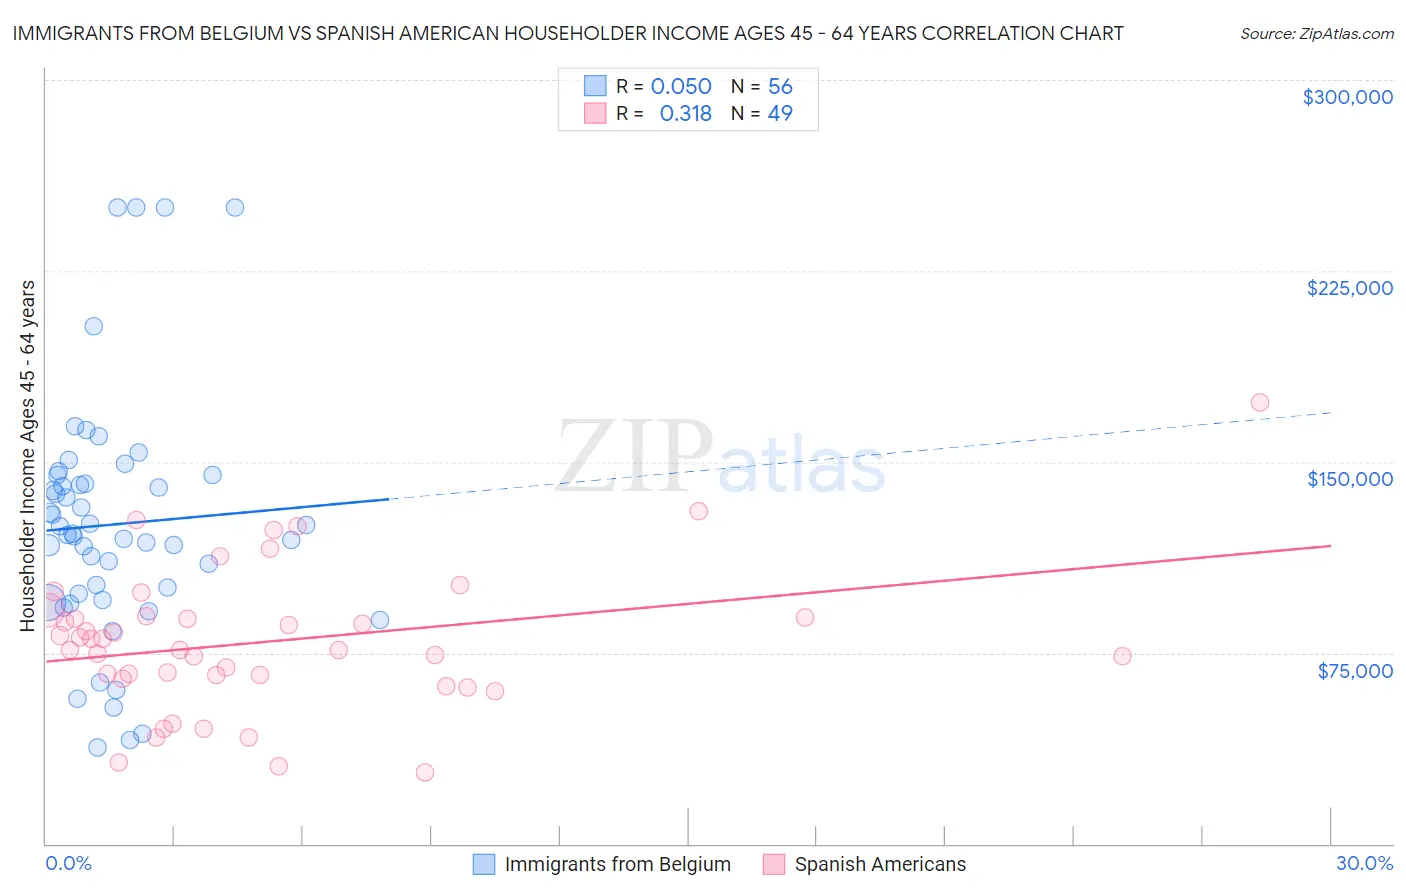 Immigrants from Belgium vs Spanish American Householder Income Ages 45 - 64 years